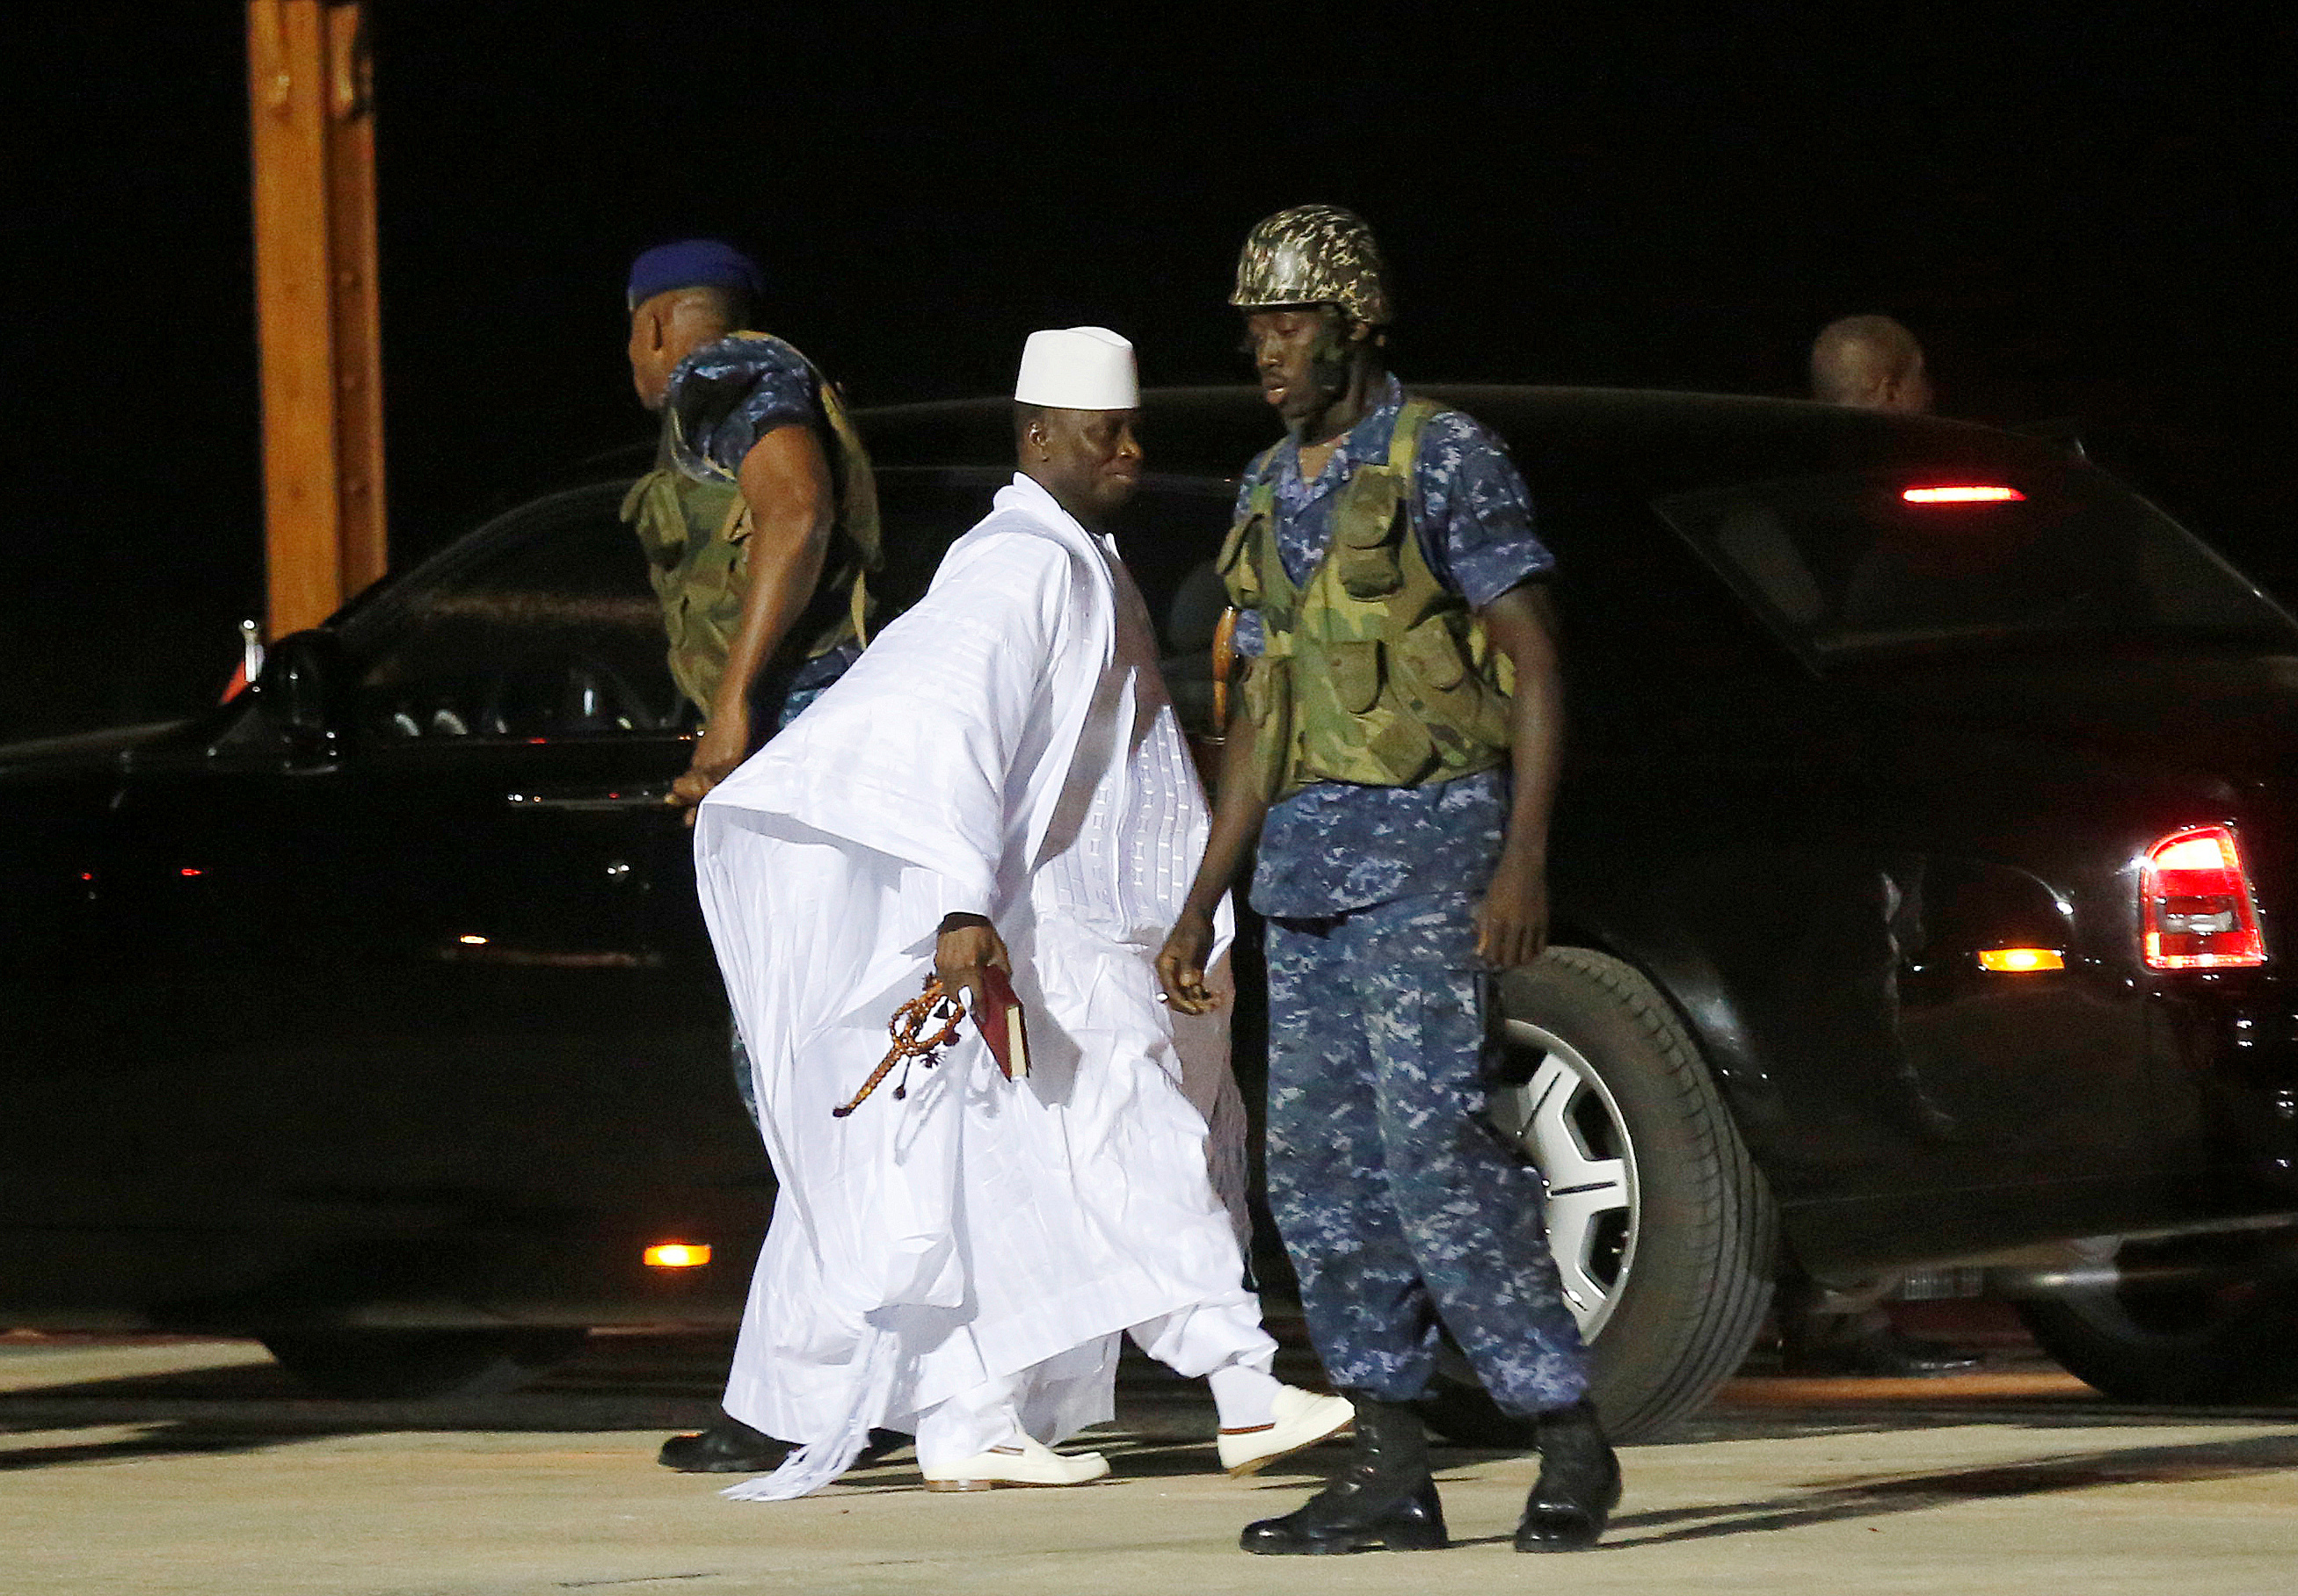 Former Gambian President Yahya Jammeh arrives at the airport before flying into exile from Gambia, January 21, 2017. REUTERS/Thierry Gouegnon     